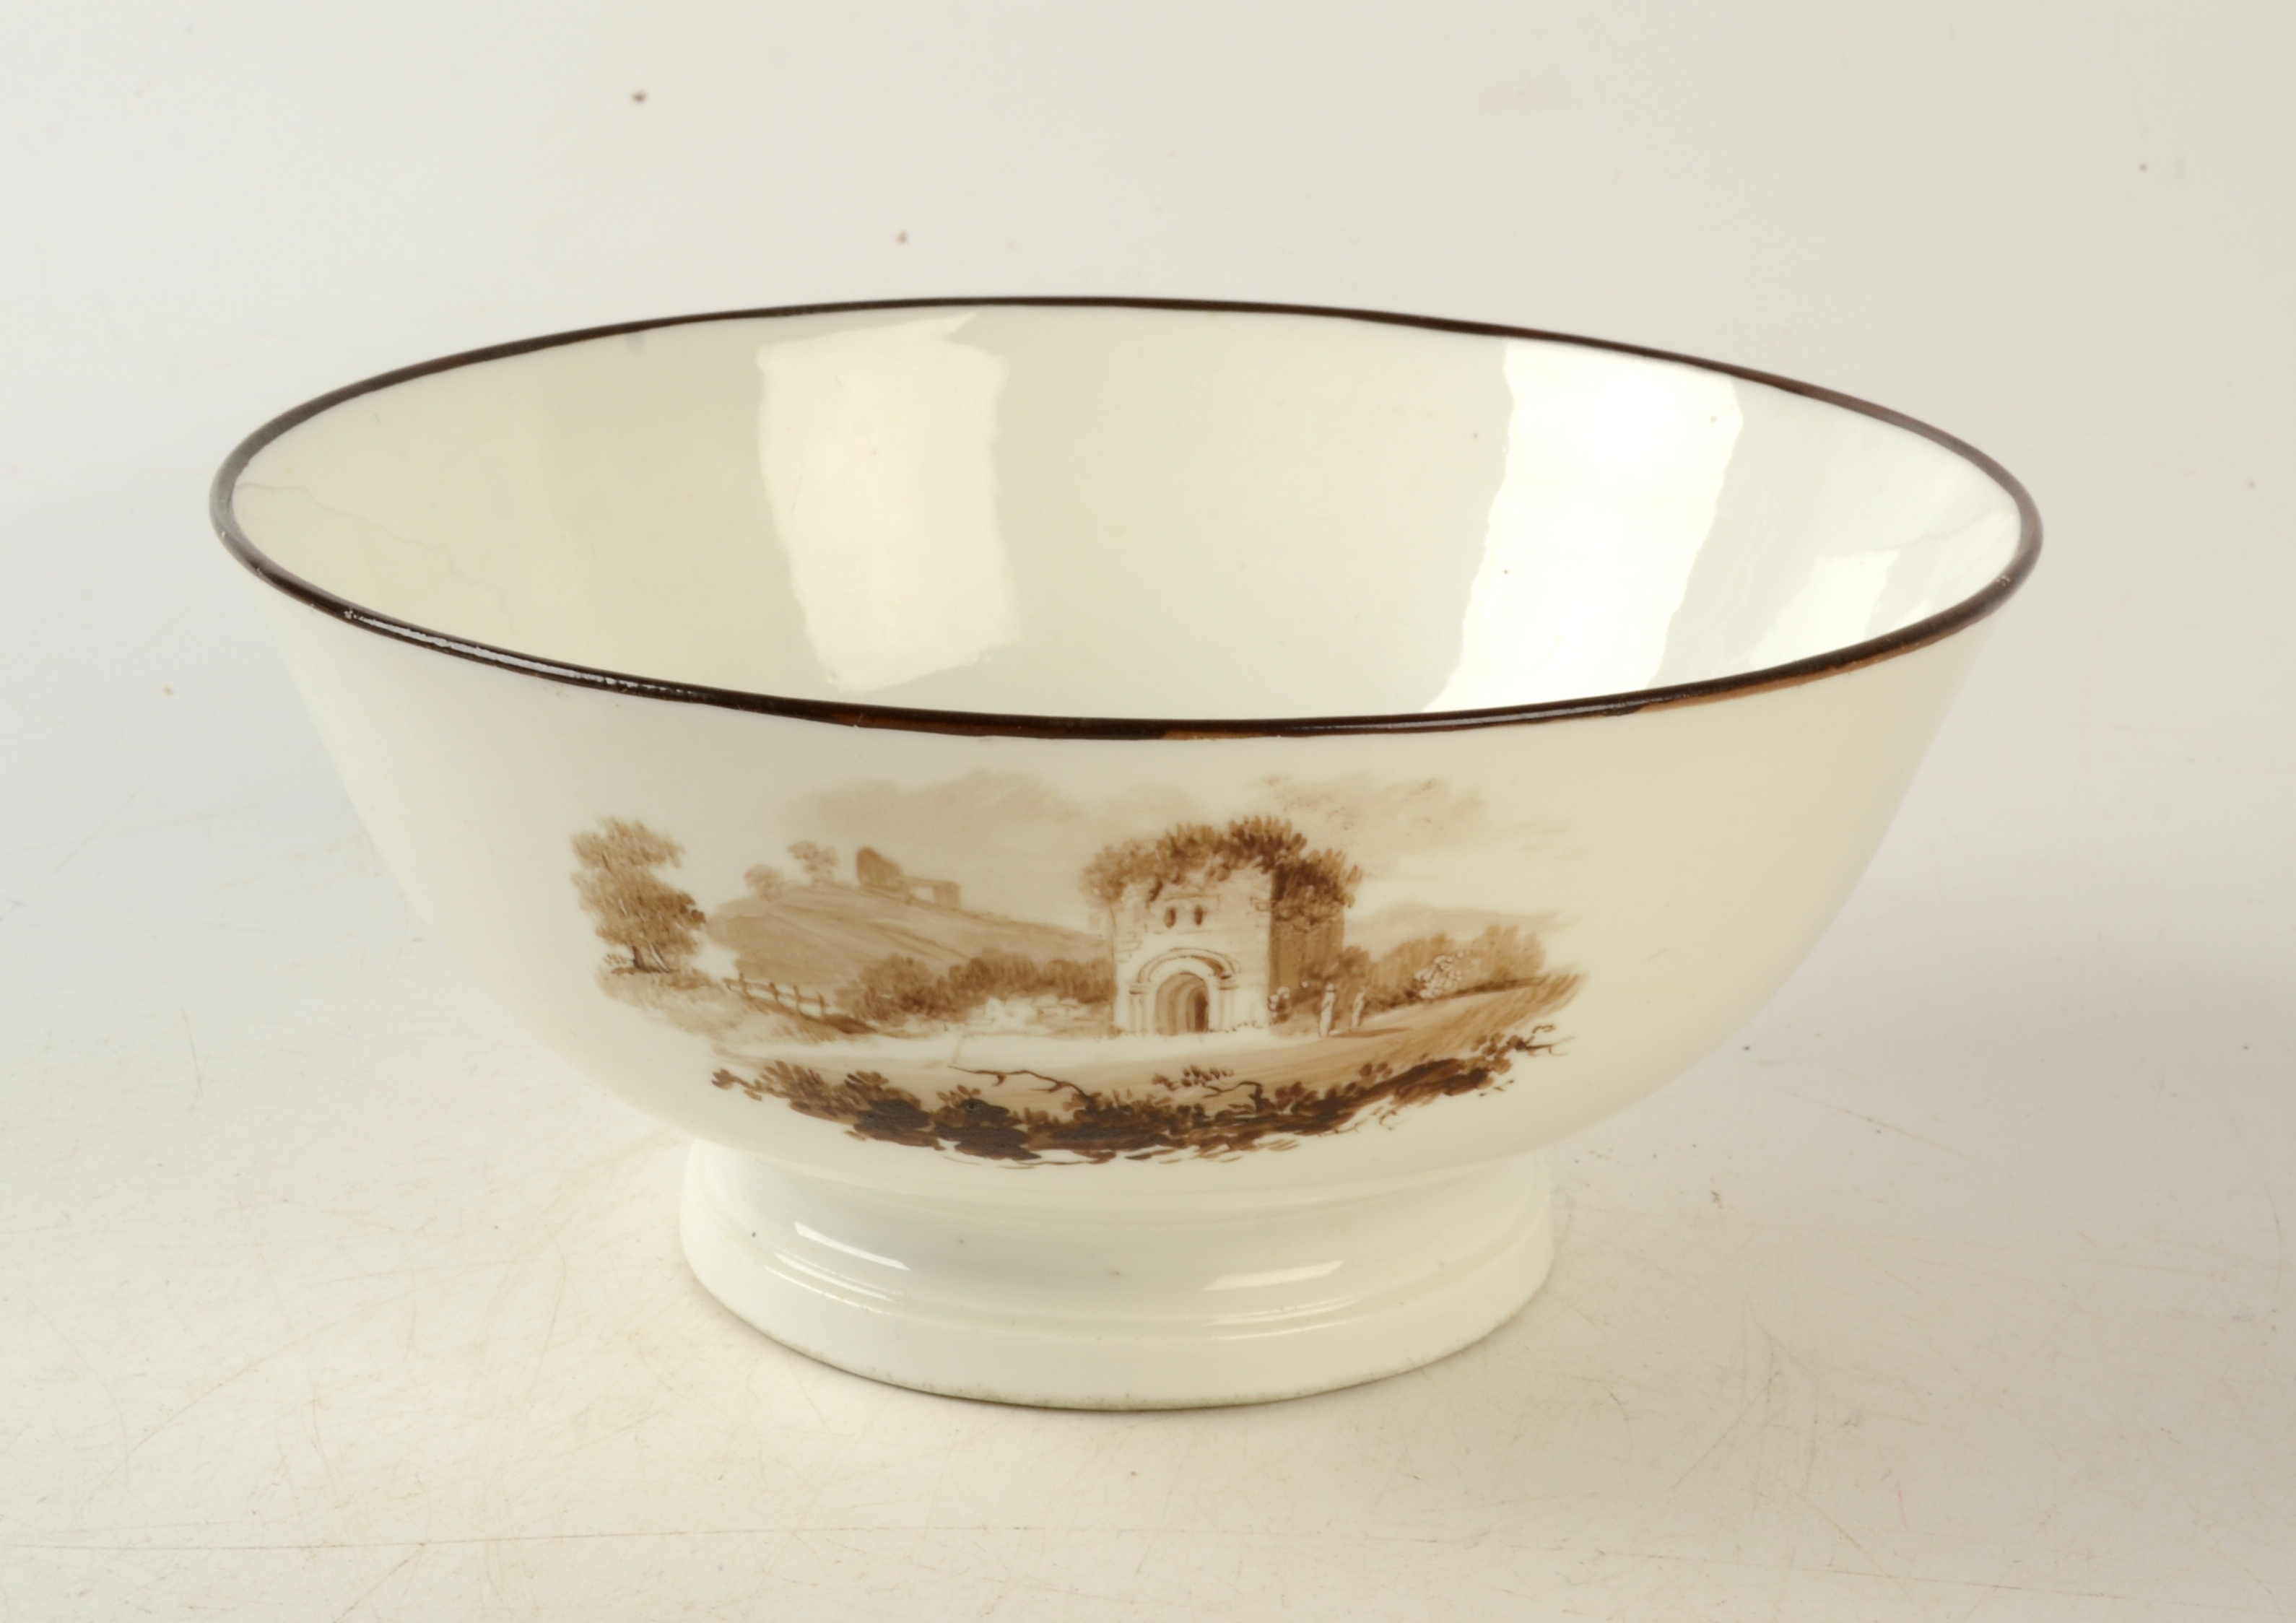 An 18th century Swansea porcelain bowl painted with three sepia landscape vignettes, - Image 2 of 4